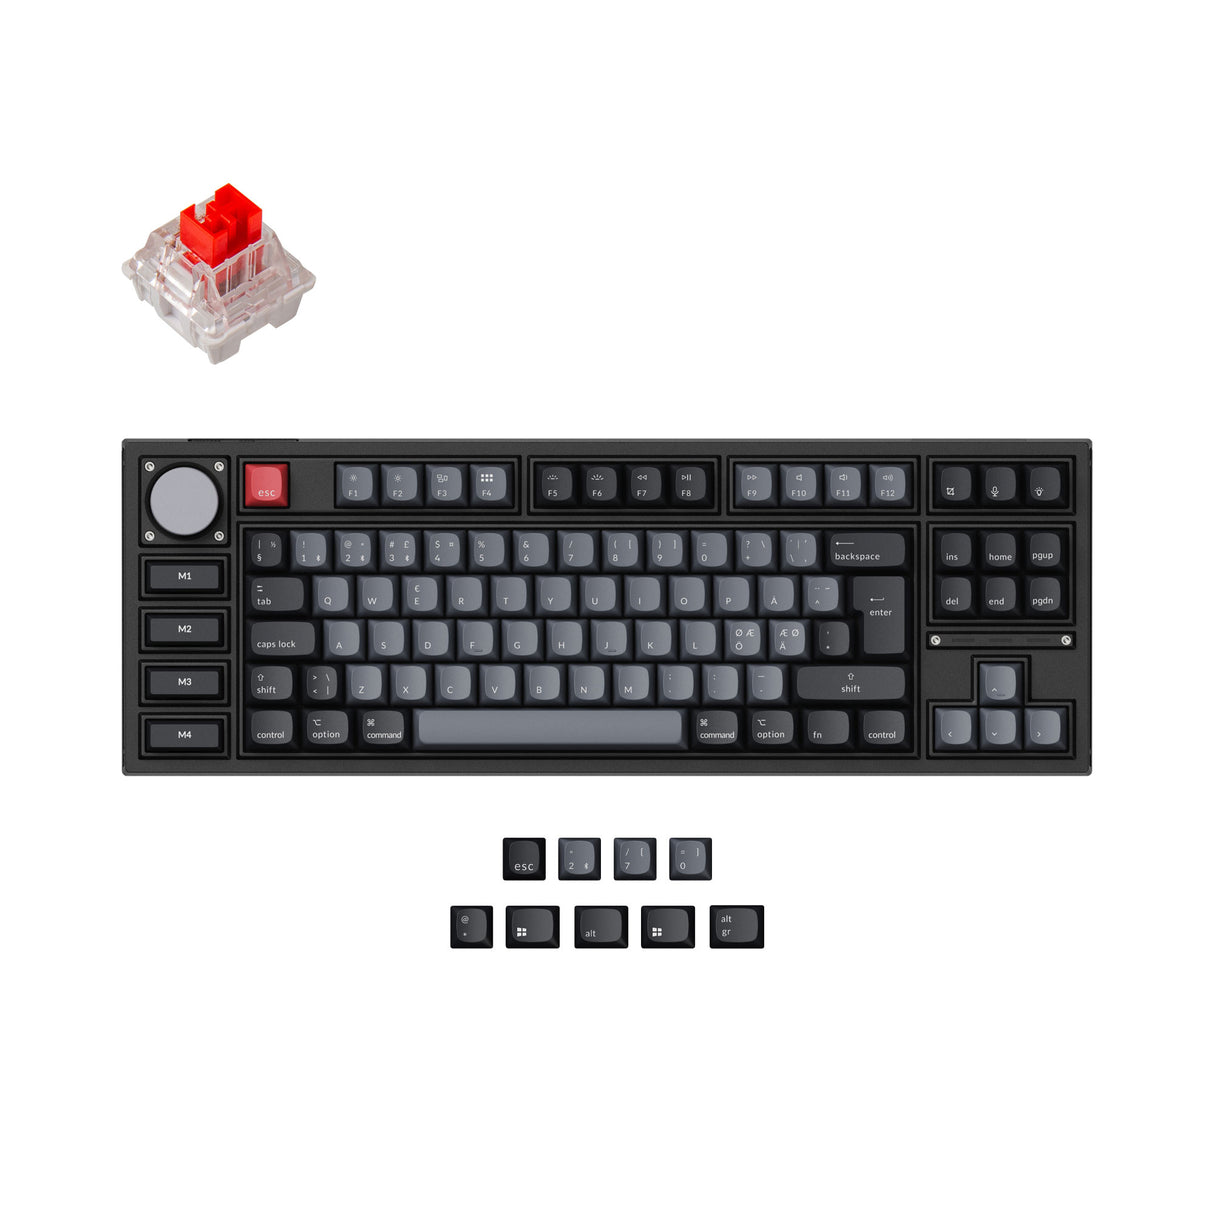 Keychron Q3 Pro QMK/VIA wireless custom mechanical keyboard 80 percent layout aluminum black for Mac WIndows Linux RGB backlight hot-swappable K Pro switch red ISO Nordic layout